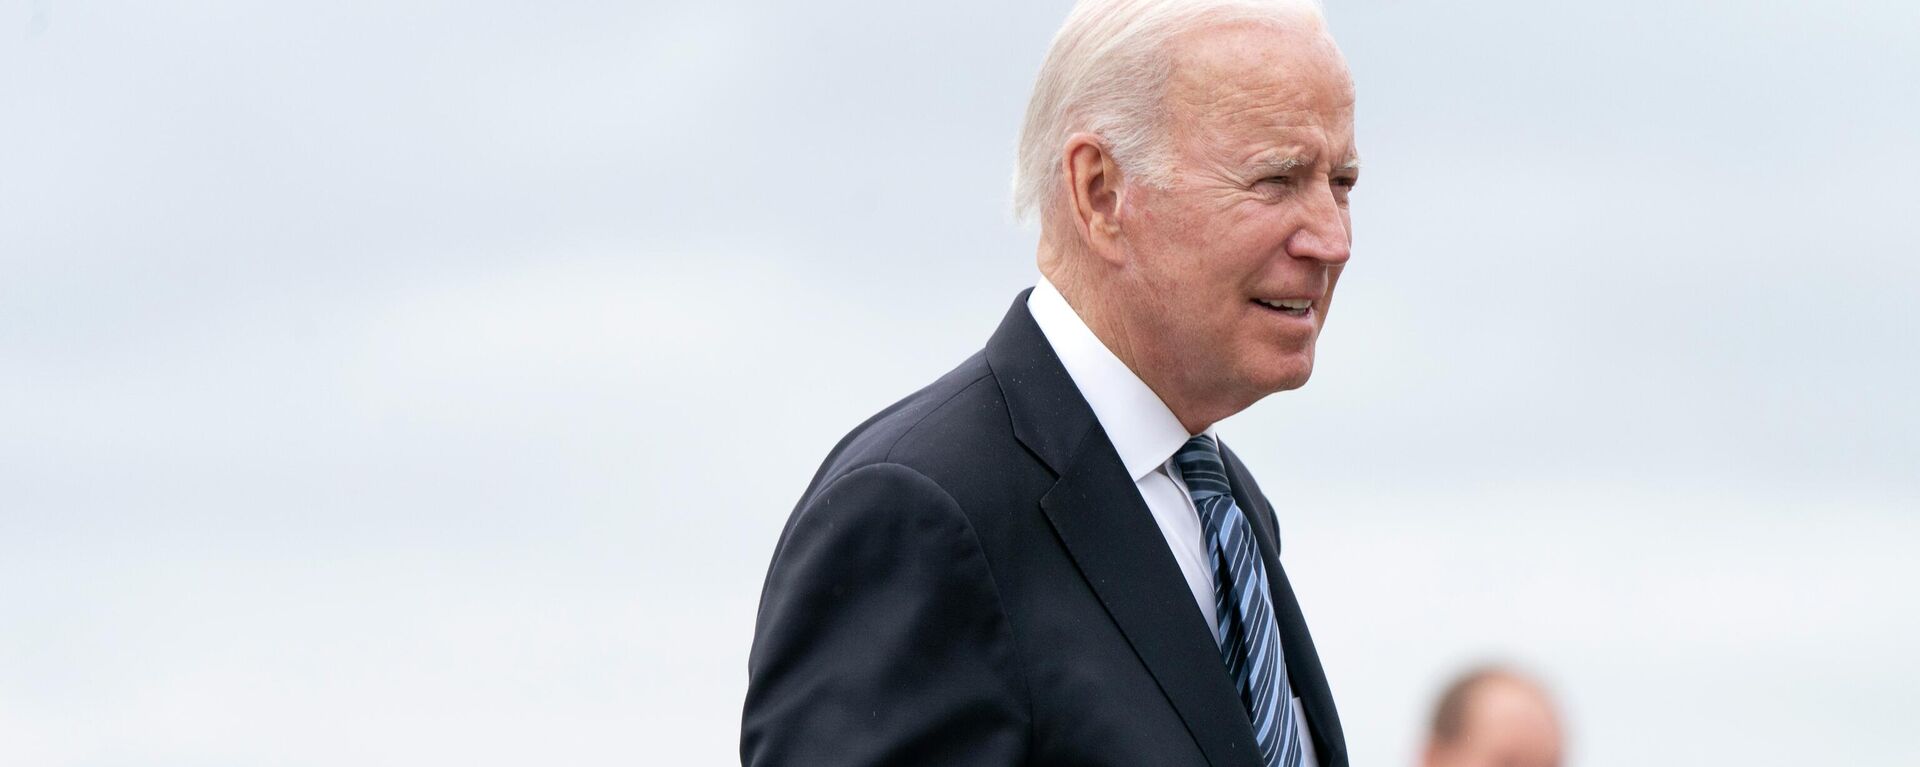 President Joe Biden responds to a reporter as he boards Air Force One at Minneapolis-St. Paul International Airport after attending the memorial service for former Vice President Walter Mondale, Sunday, May 1, 2022, in Minneapolis. - Sputnik International, 1920, 01.05.2022